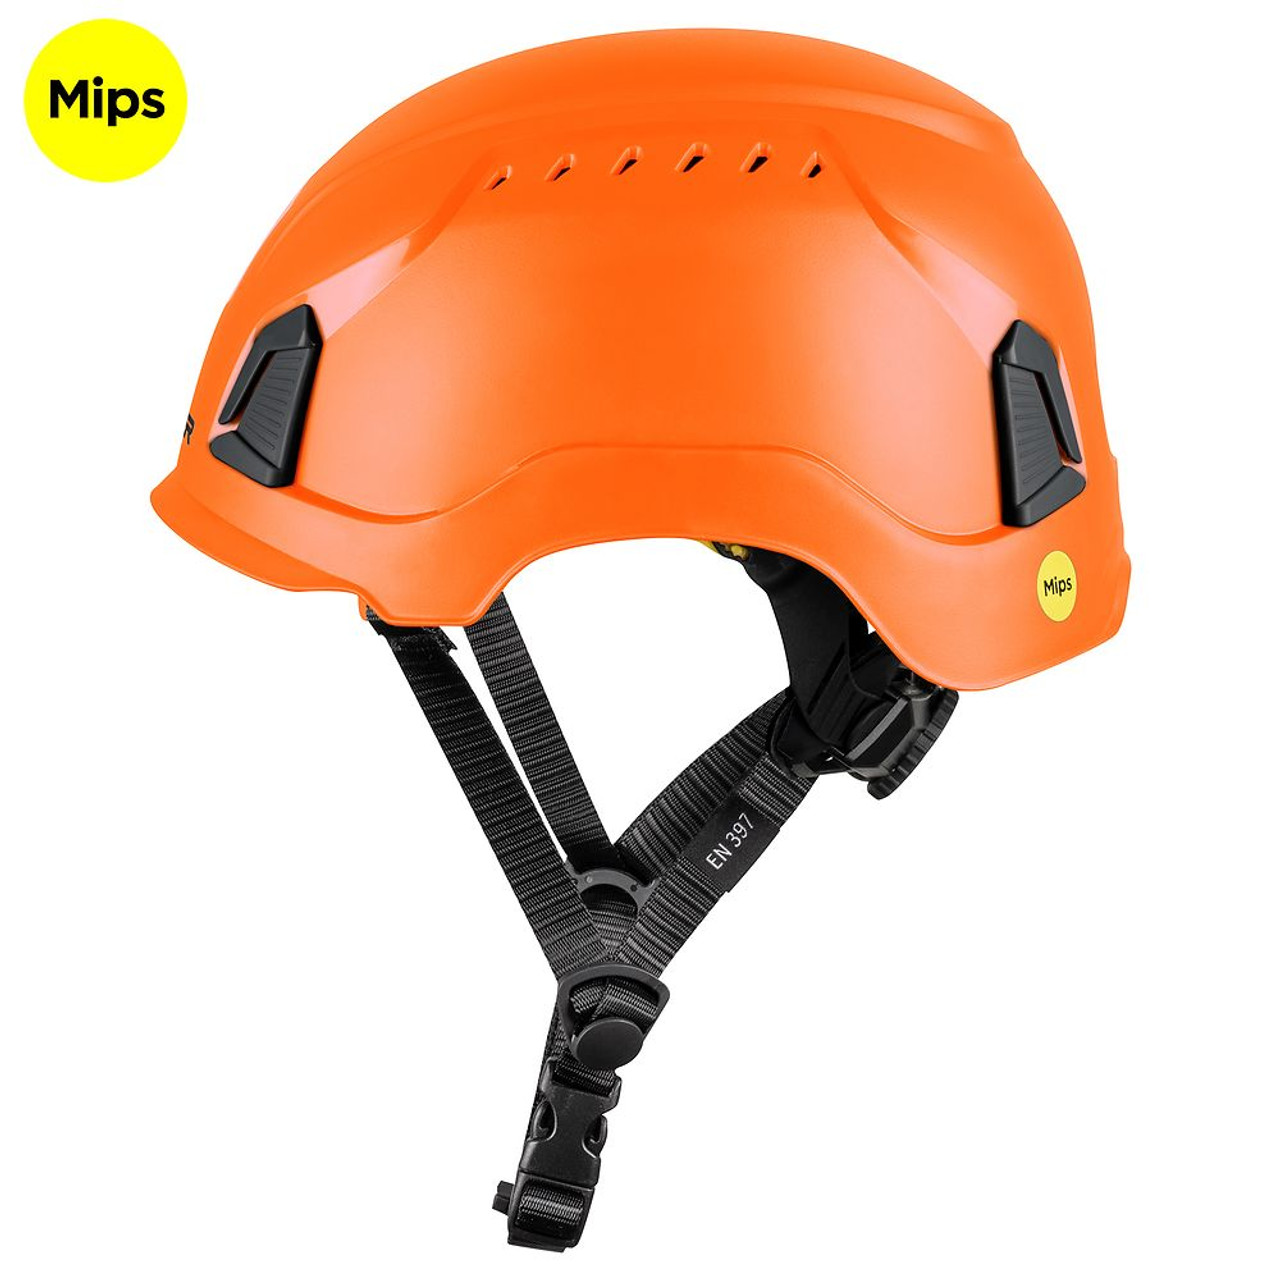 ZEKLER Helmet | ZONE Orange Technical Safety Helmet  with MIPS for Rope Access, Electricians to create a total tool solution for construction.